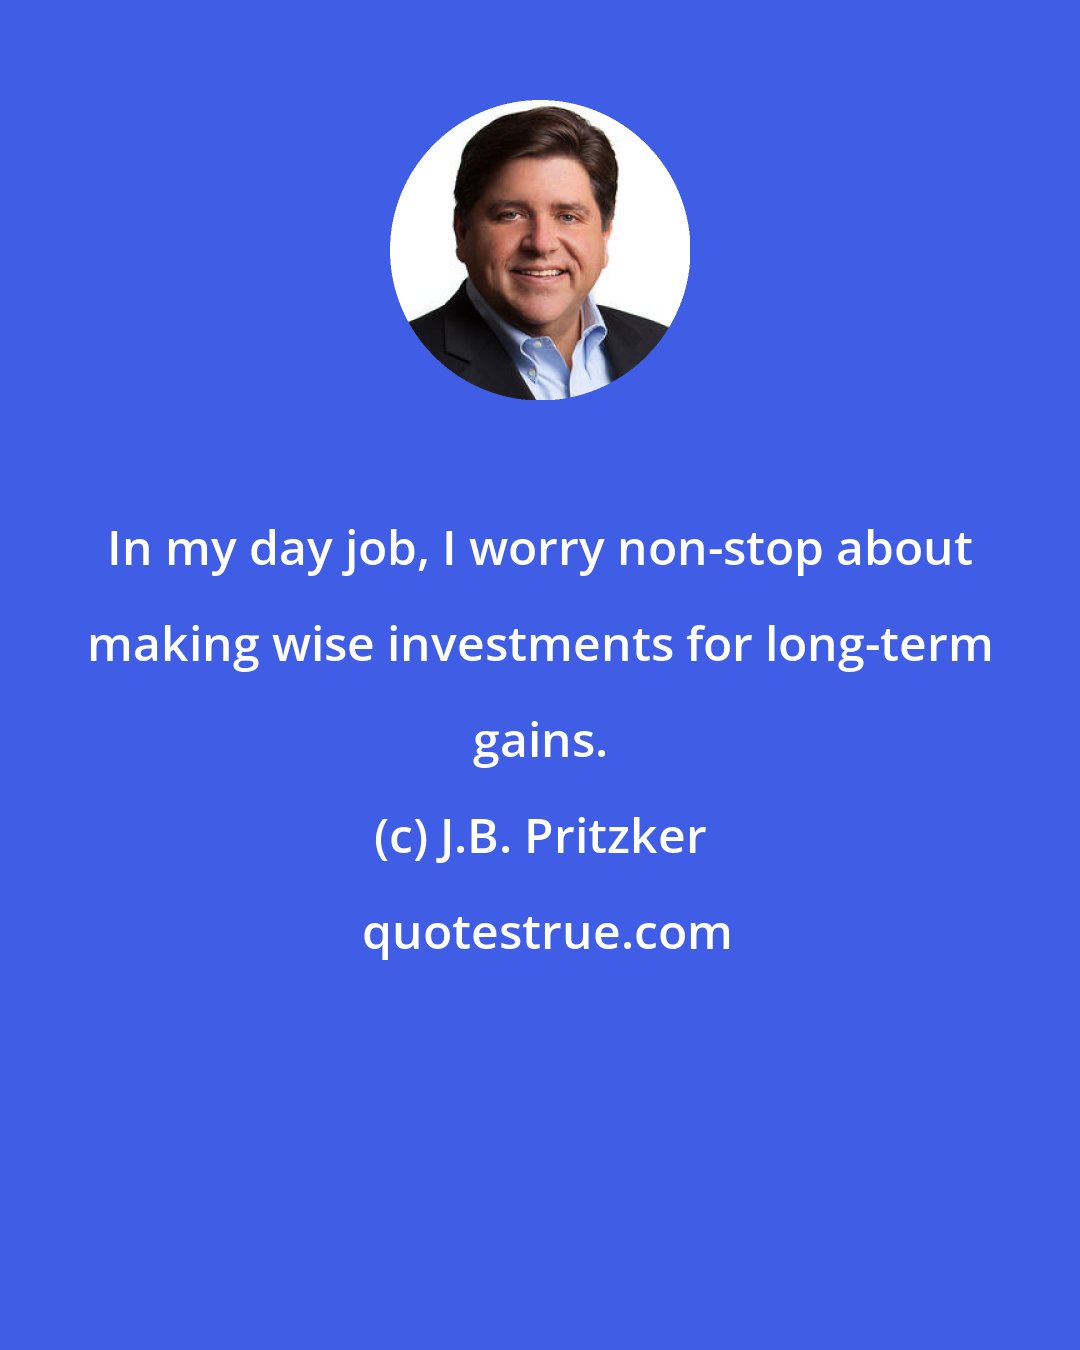 J.B. Pritzker: In my day job, I worry non-stop about making wise investments for long-term gains.